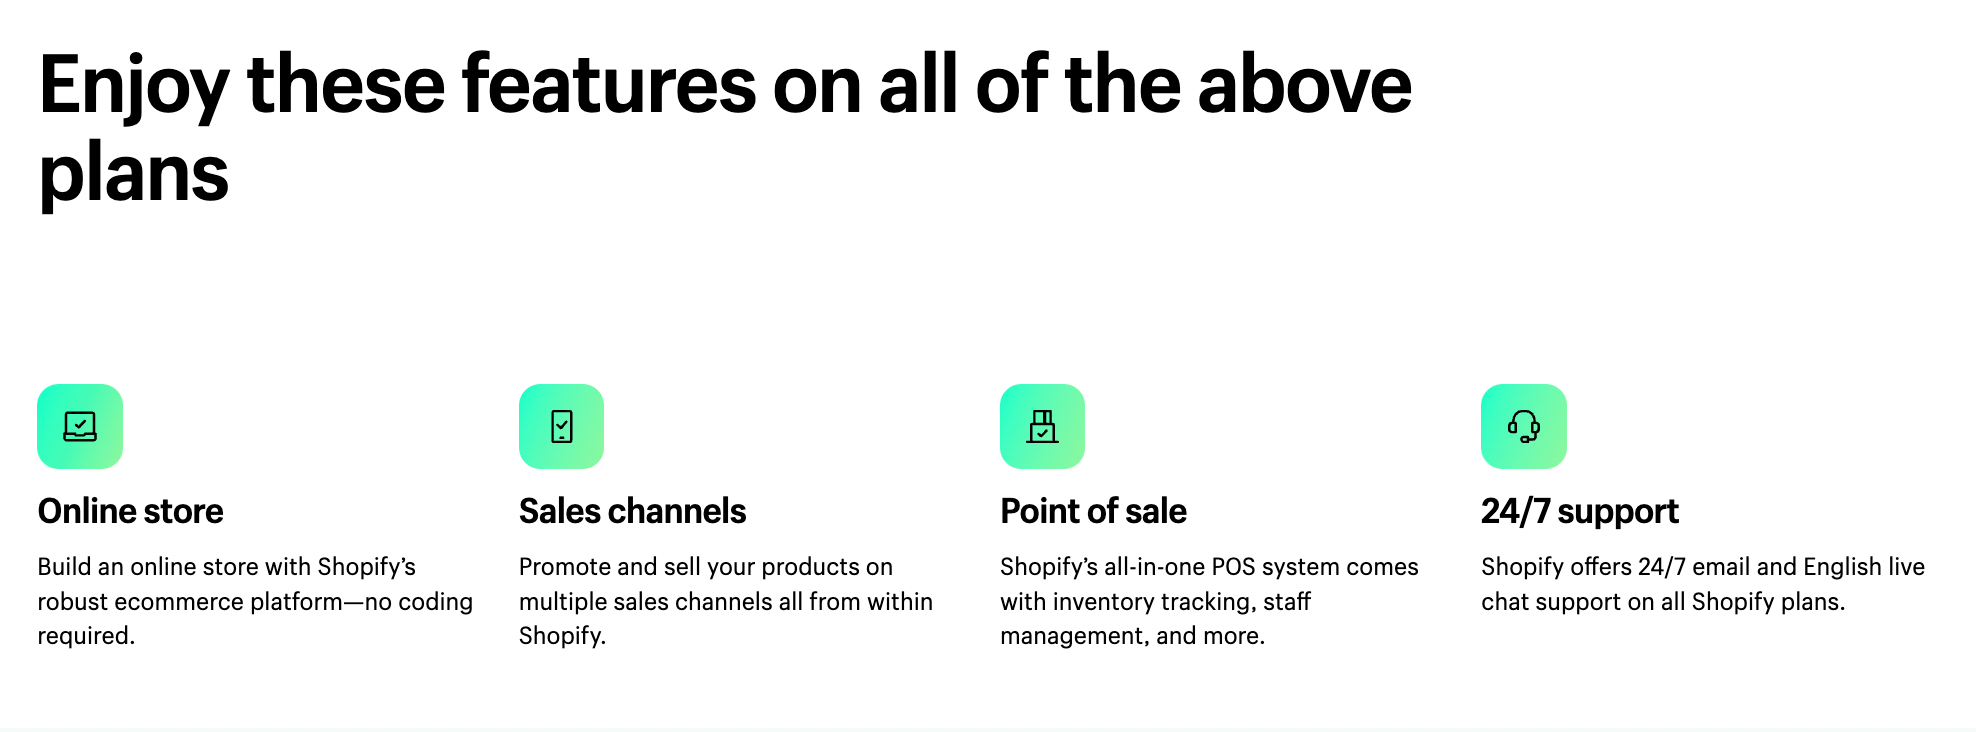 All About Shopify